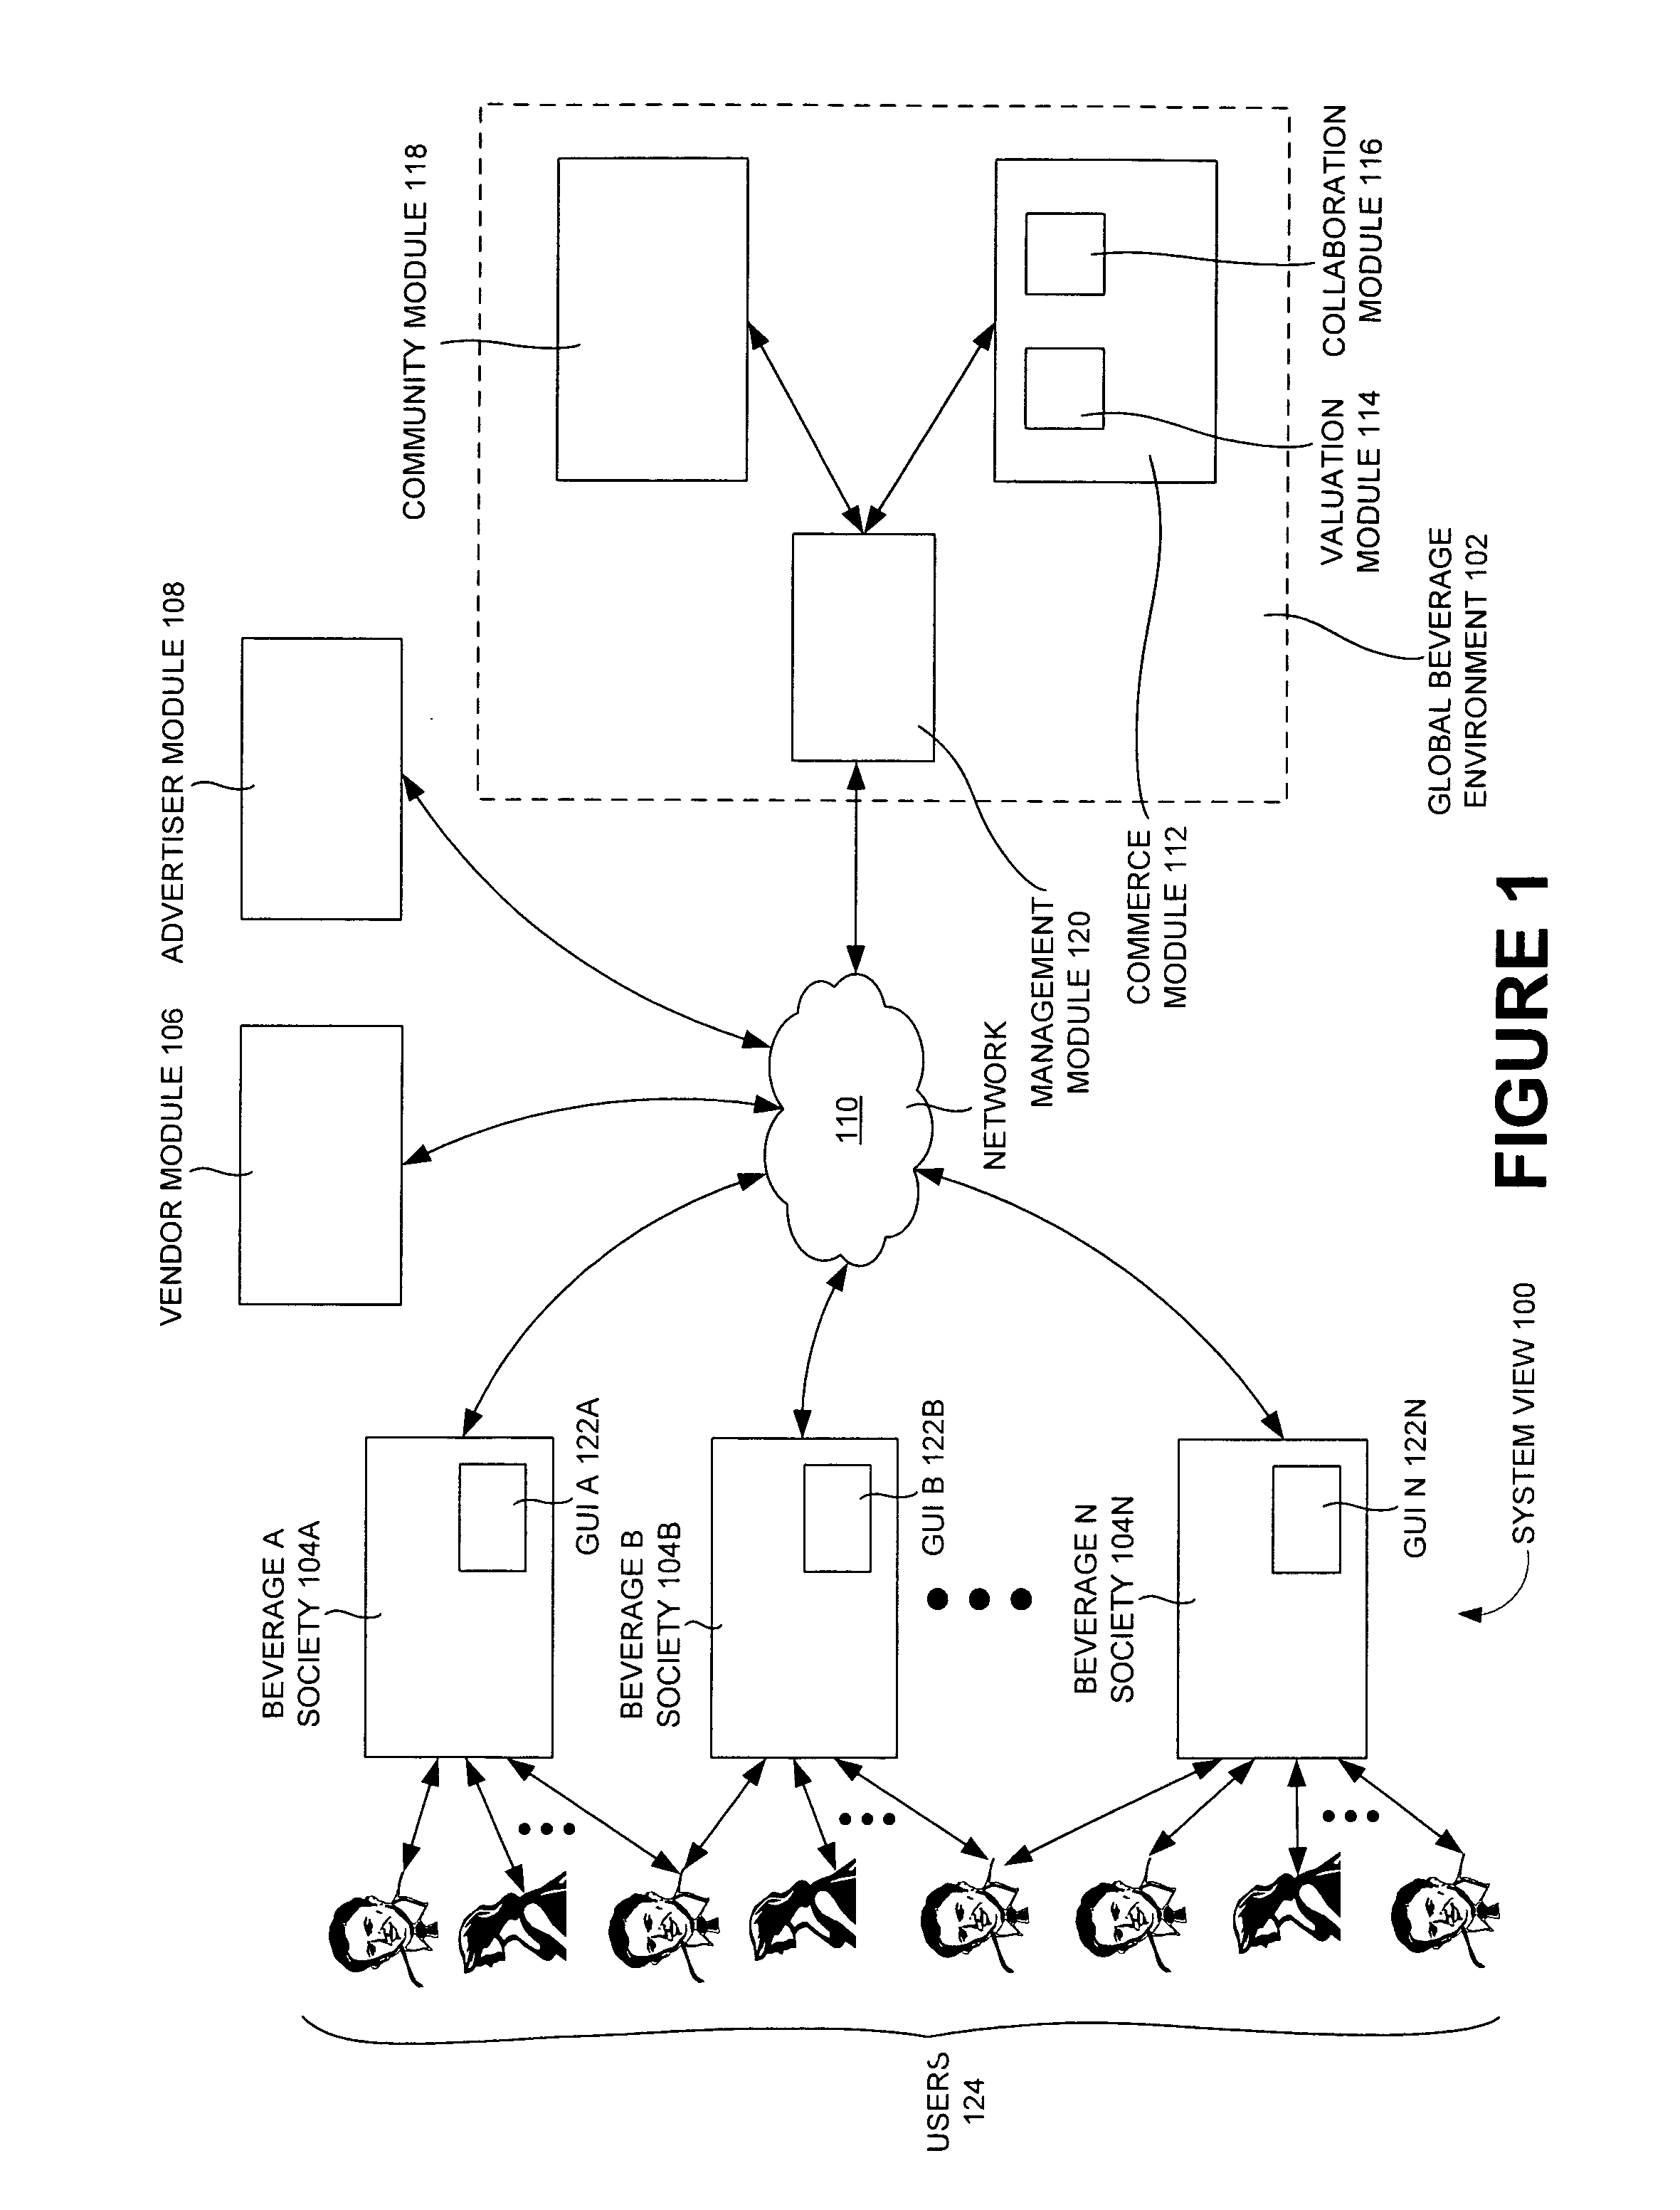 Value analysis and value added concoction of a beverage in a network environment of the beverage